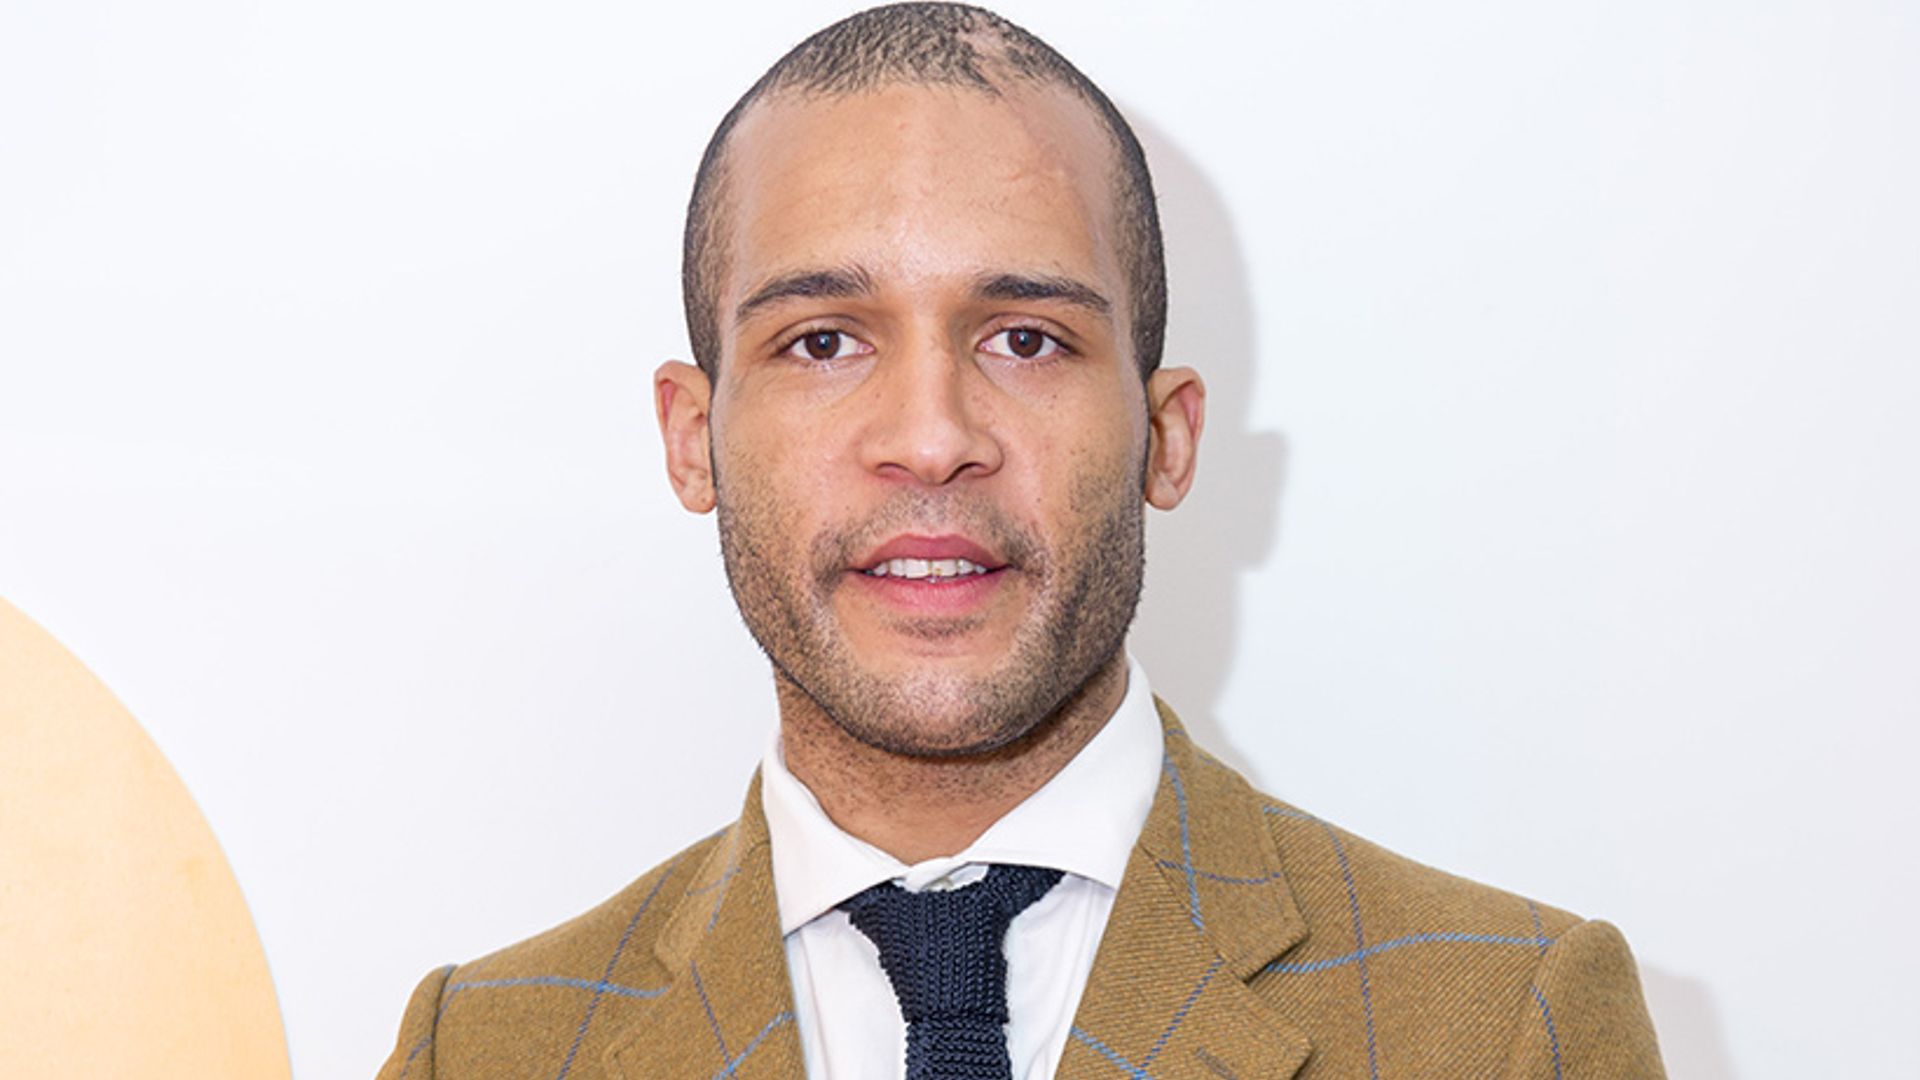 Ex-footballer Clarke Carlisle found safe and well after missing report – his wife thanks fans for their help